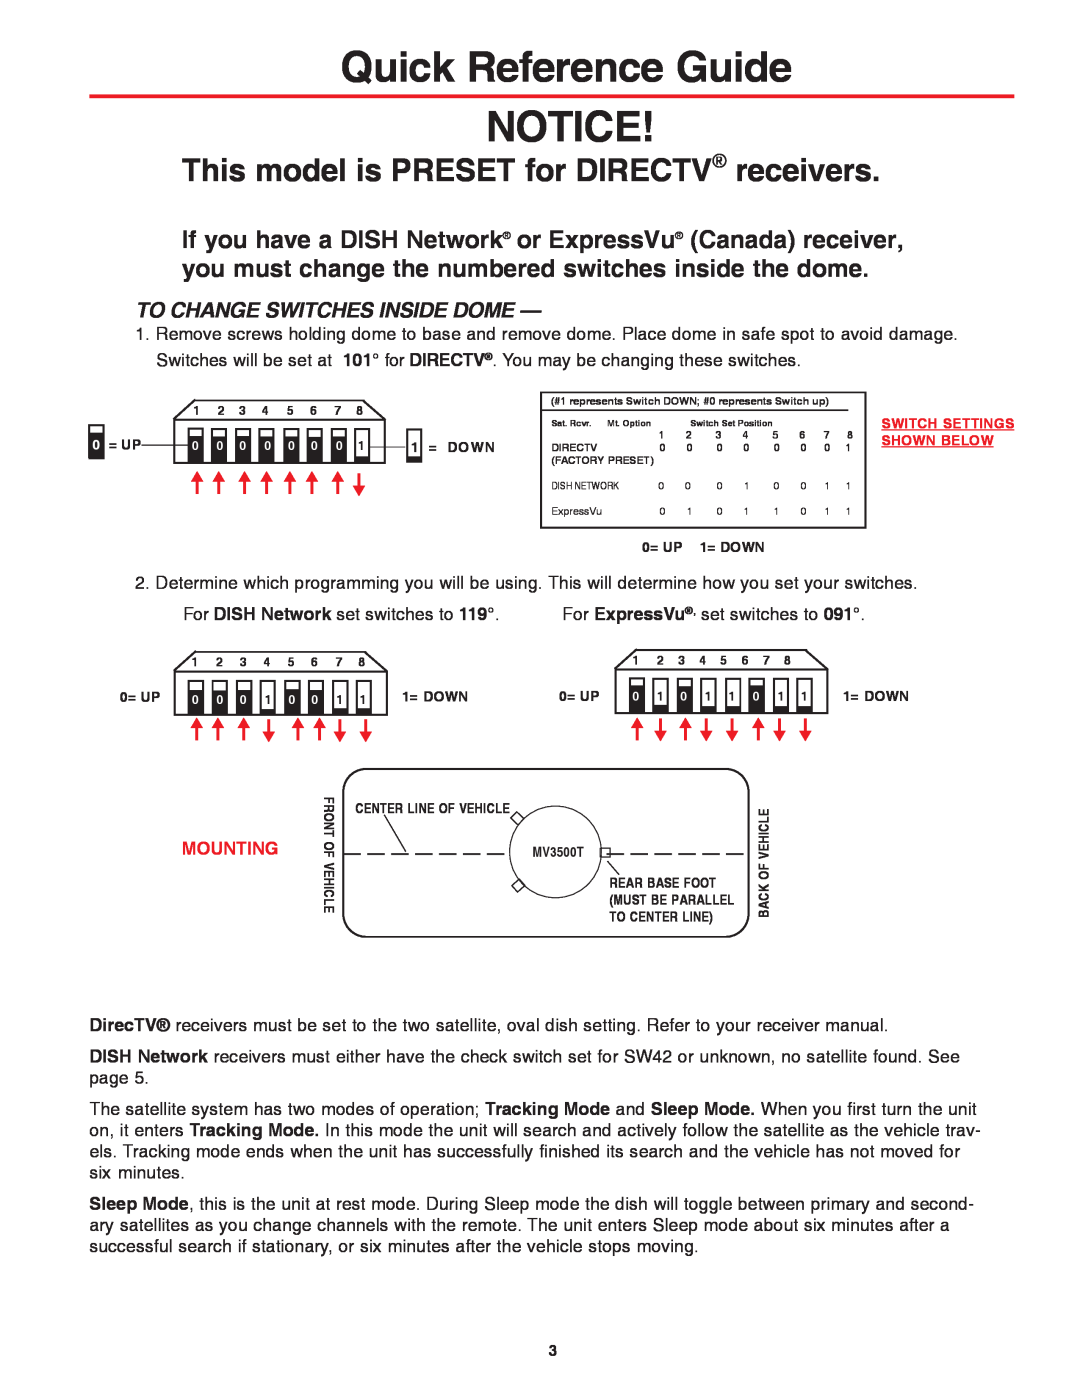 Winegard MVT-35W Quick Reference Guide NOTICE, This model is PRESET for DIRECTV receivers, To Change Switches Inside Dome 